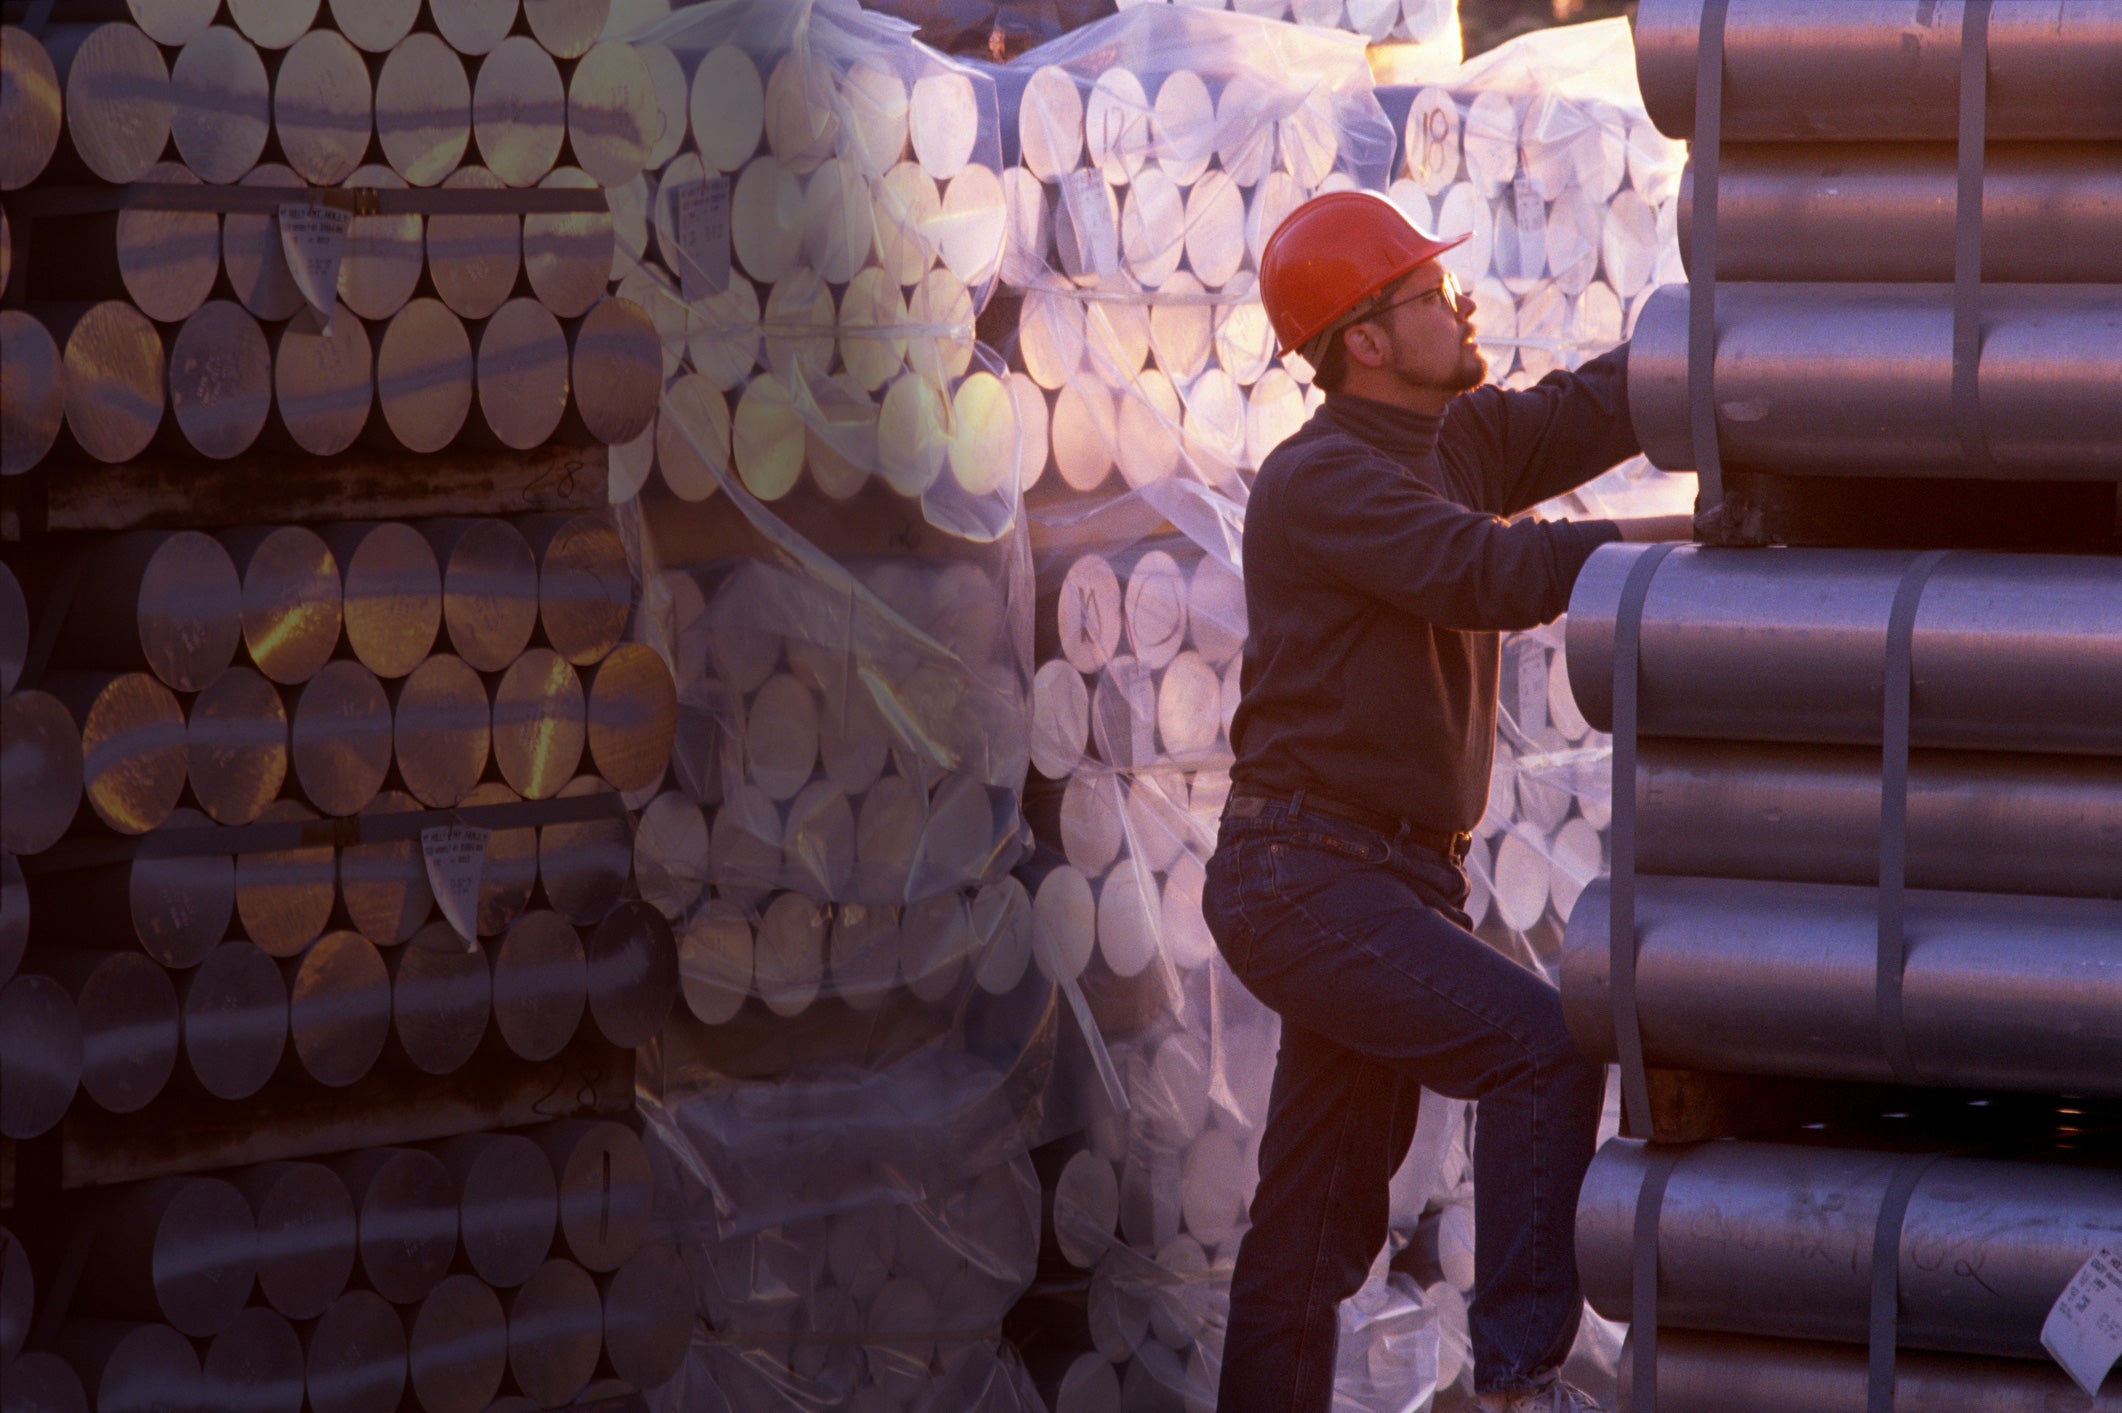 How could the Biden administration change the US aluminium industry?